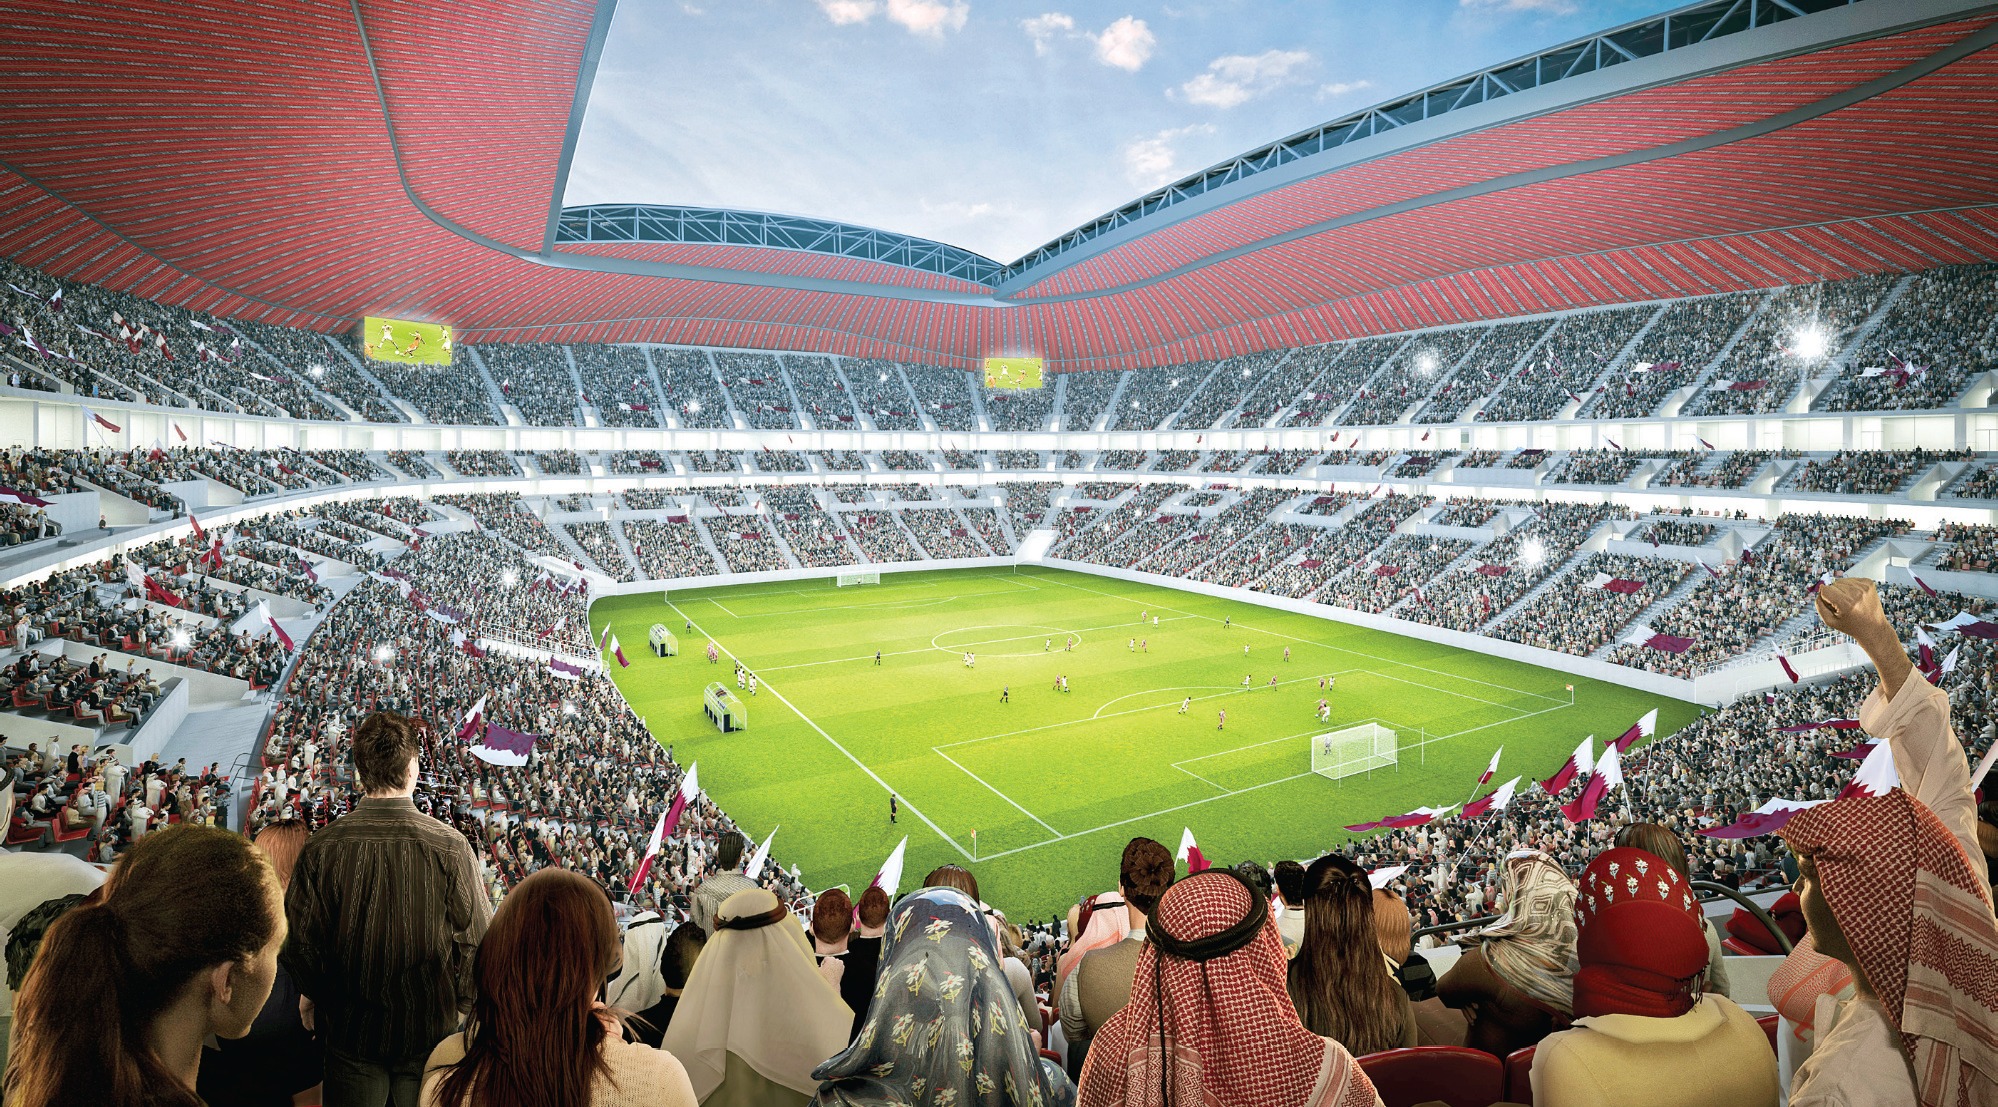 Qatar to provide 1 million doses of Covid vaccines for fans attending World Cup